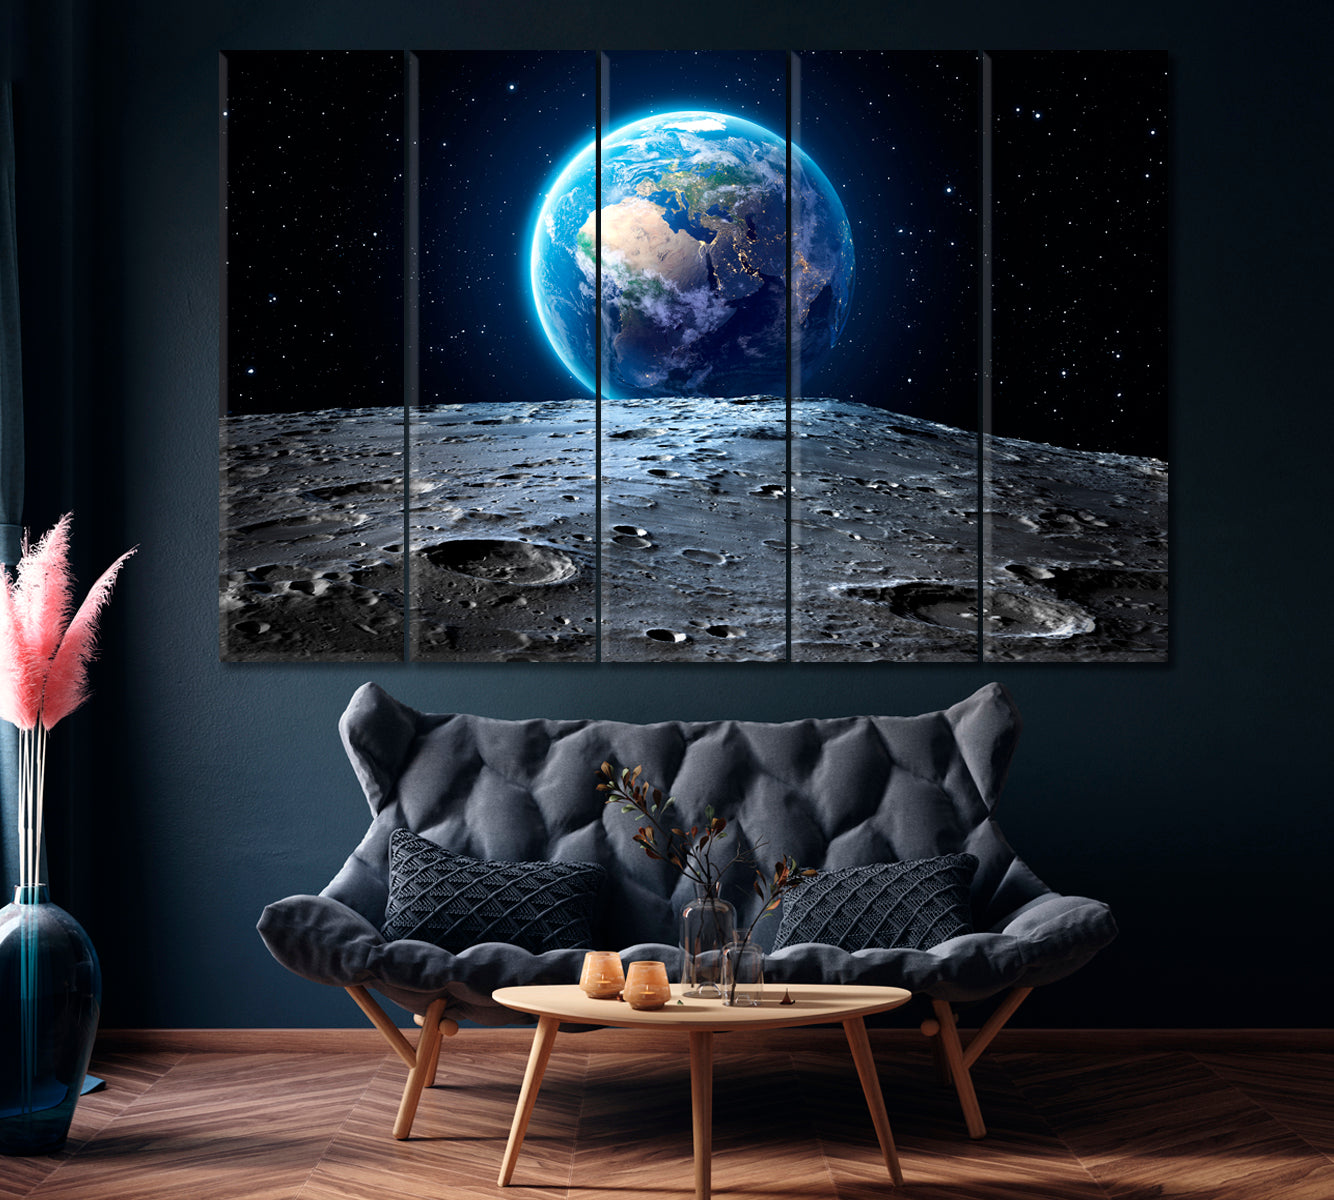 Earth Seen from Moon's Surface Canvas Print ArtLexy 5 Panels 36"x24" inches 